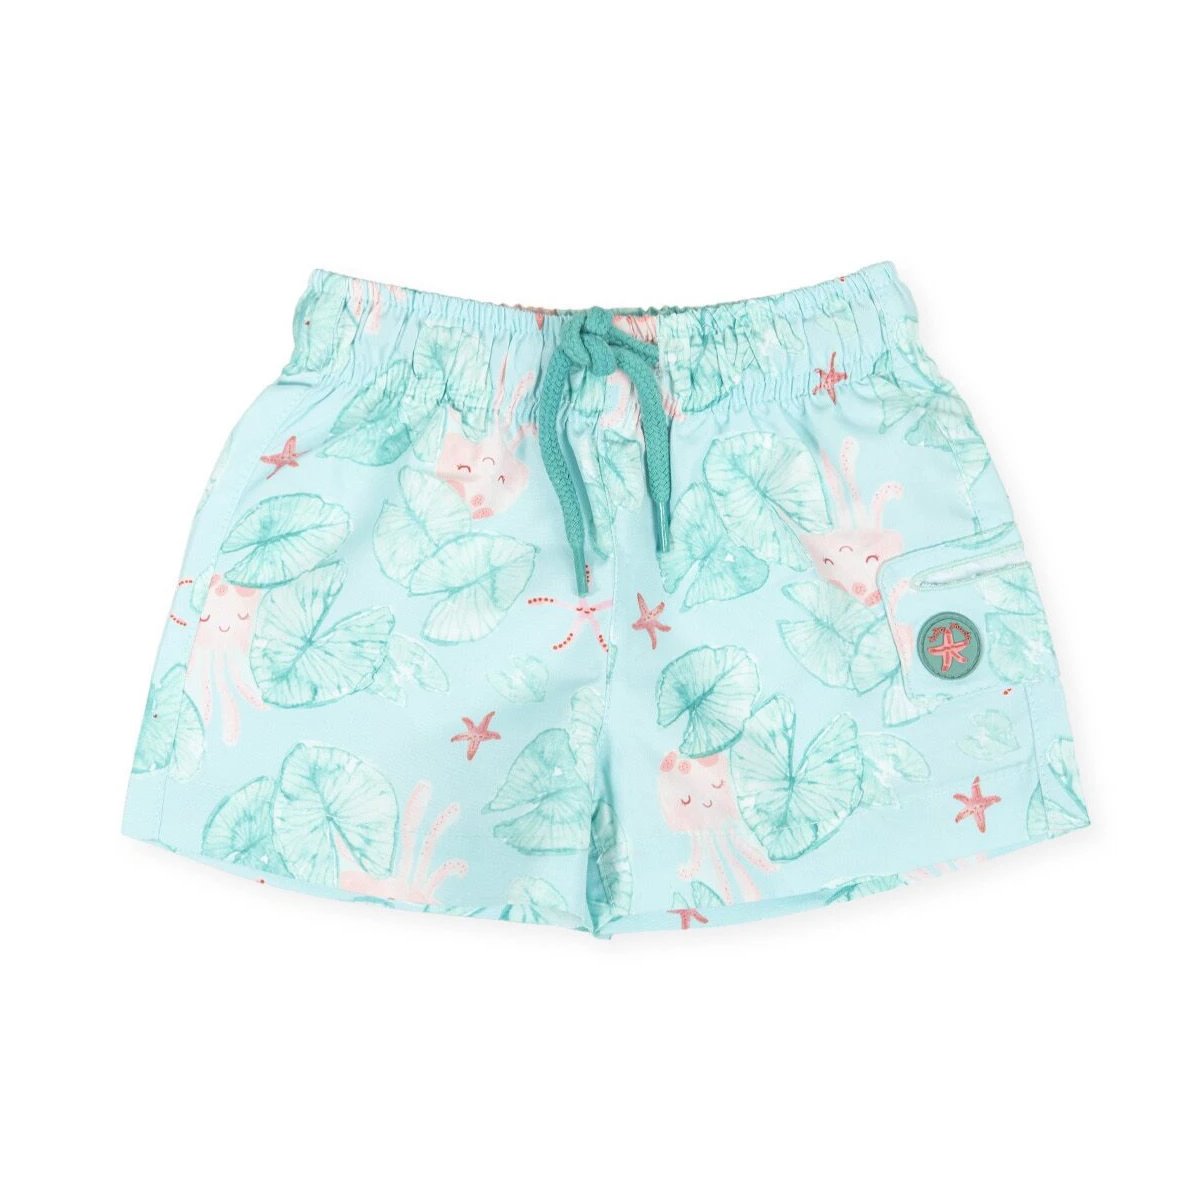 Tutto Piccolo Green Print Swim Trunks – Just Shoes for Kids